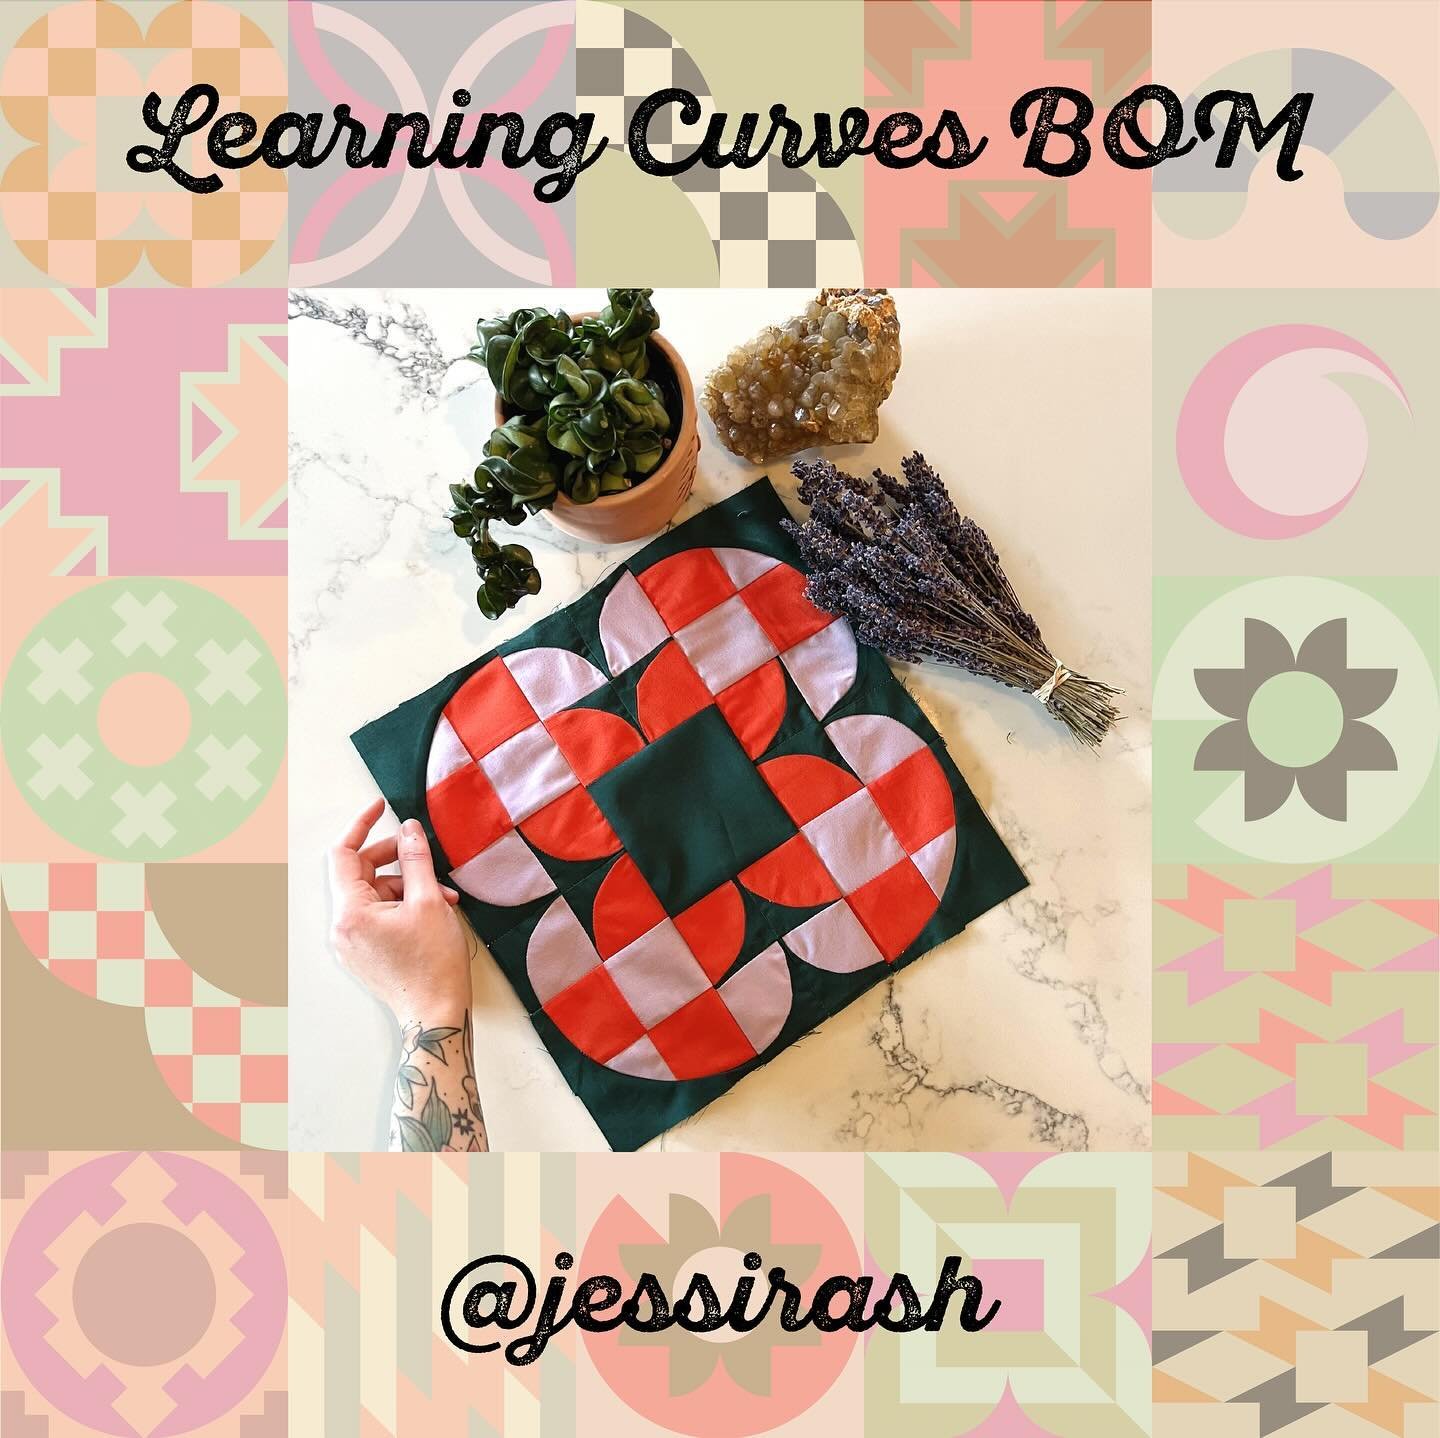 I need a whole quilt of this block, ASAP! Especially in the colors @jessirash used in her test block of the Bear Bloom quilt block. Swipe to see some mock-ups of this block as a full quilt top!

This month&rsquo;s Learning Curves BOM puts a curvy twi